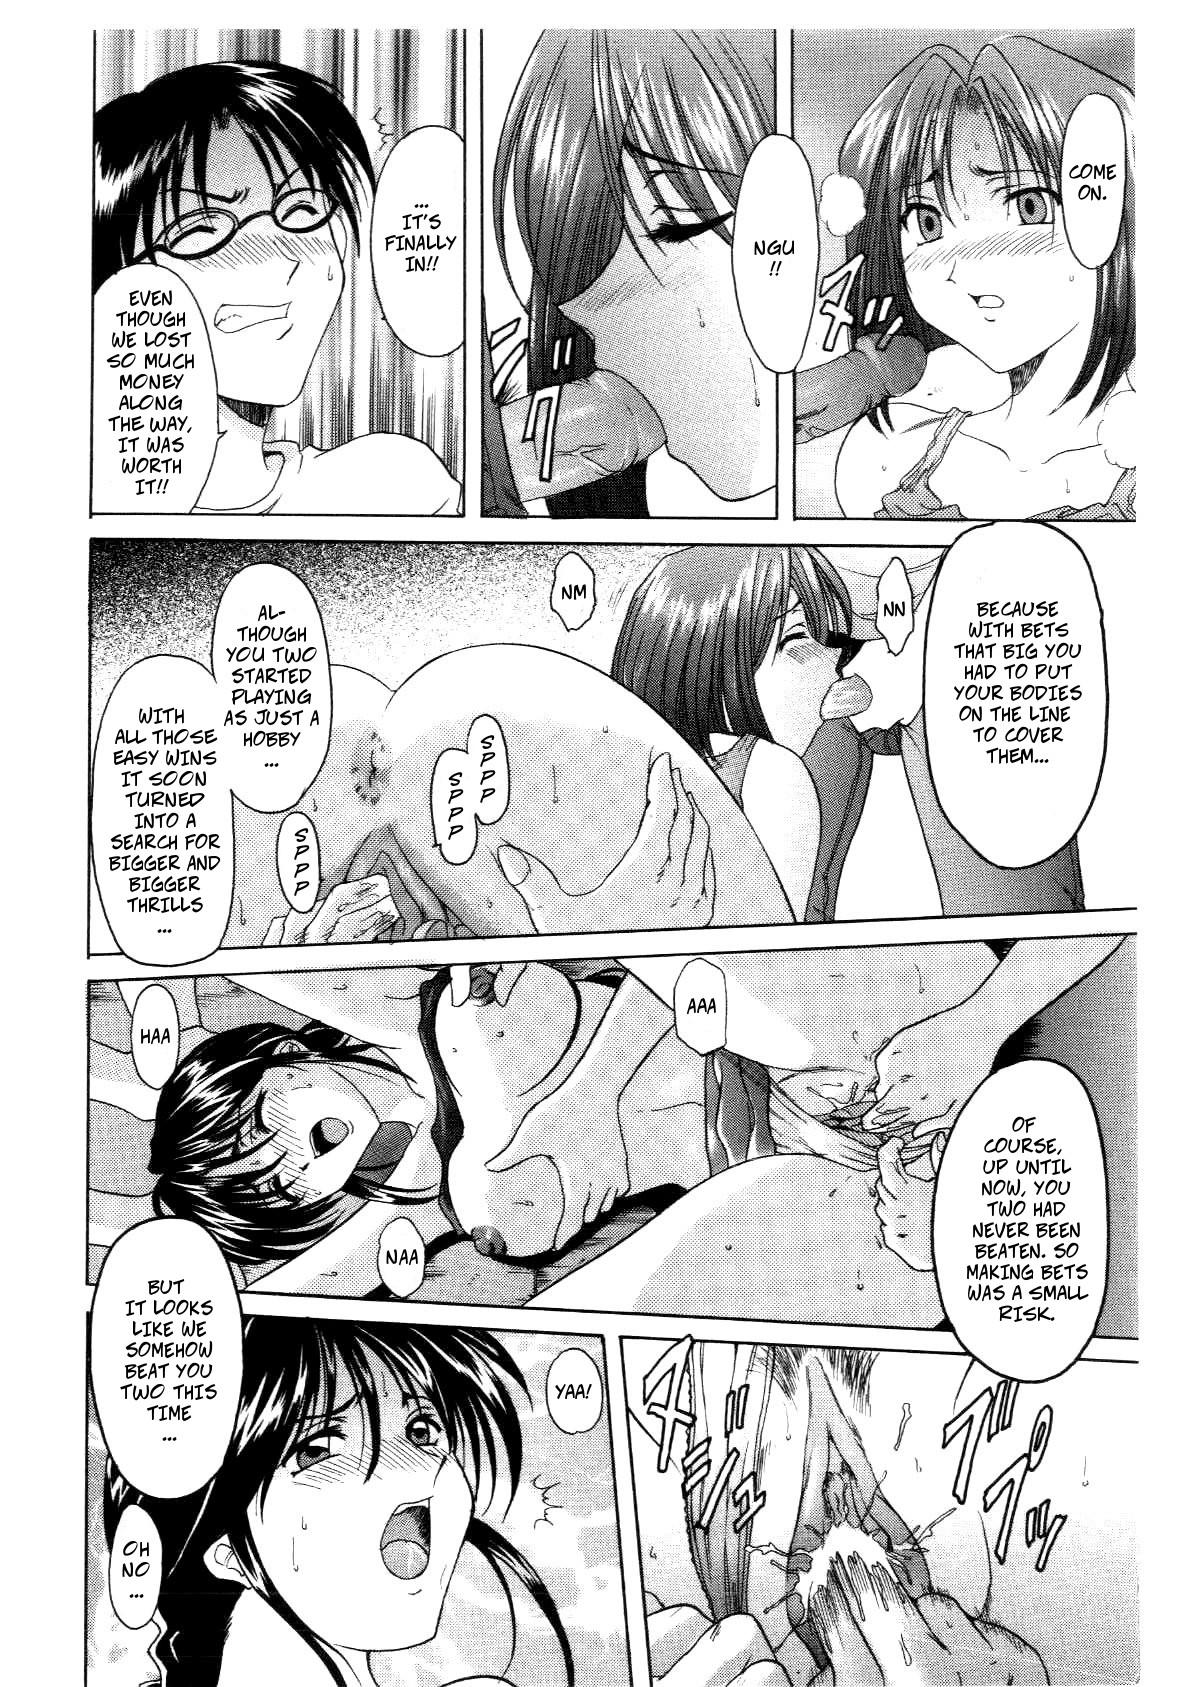 Ano Give & Take - Youre under arrest Strip - Page 7